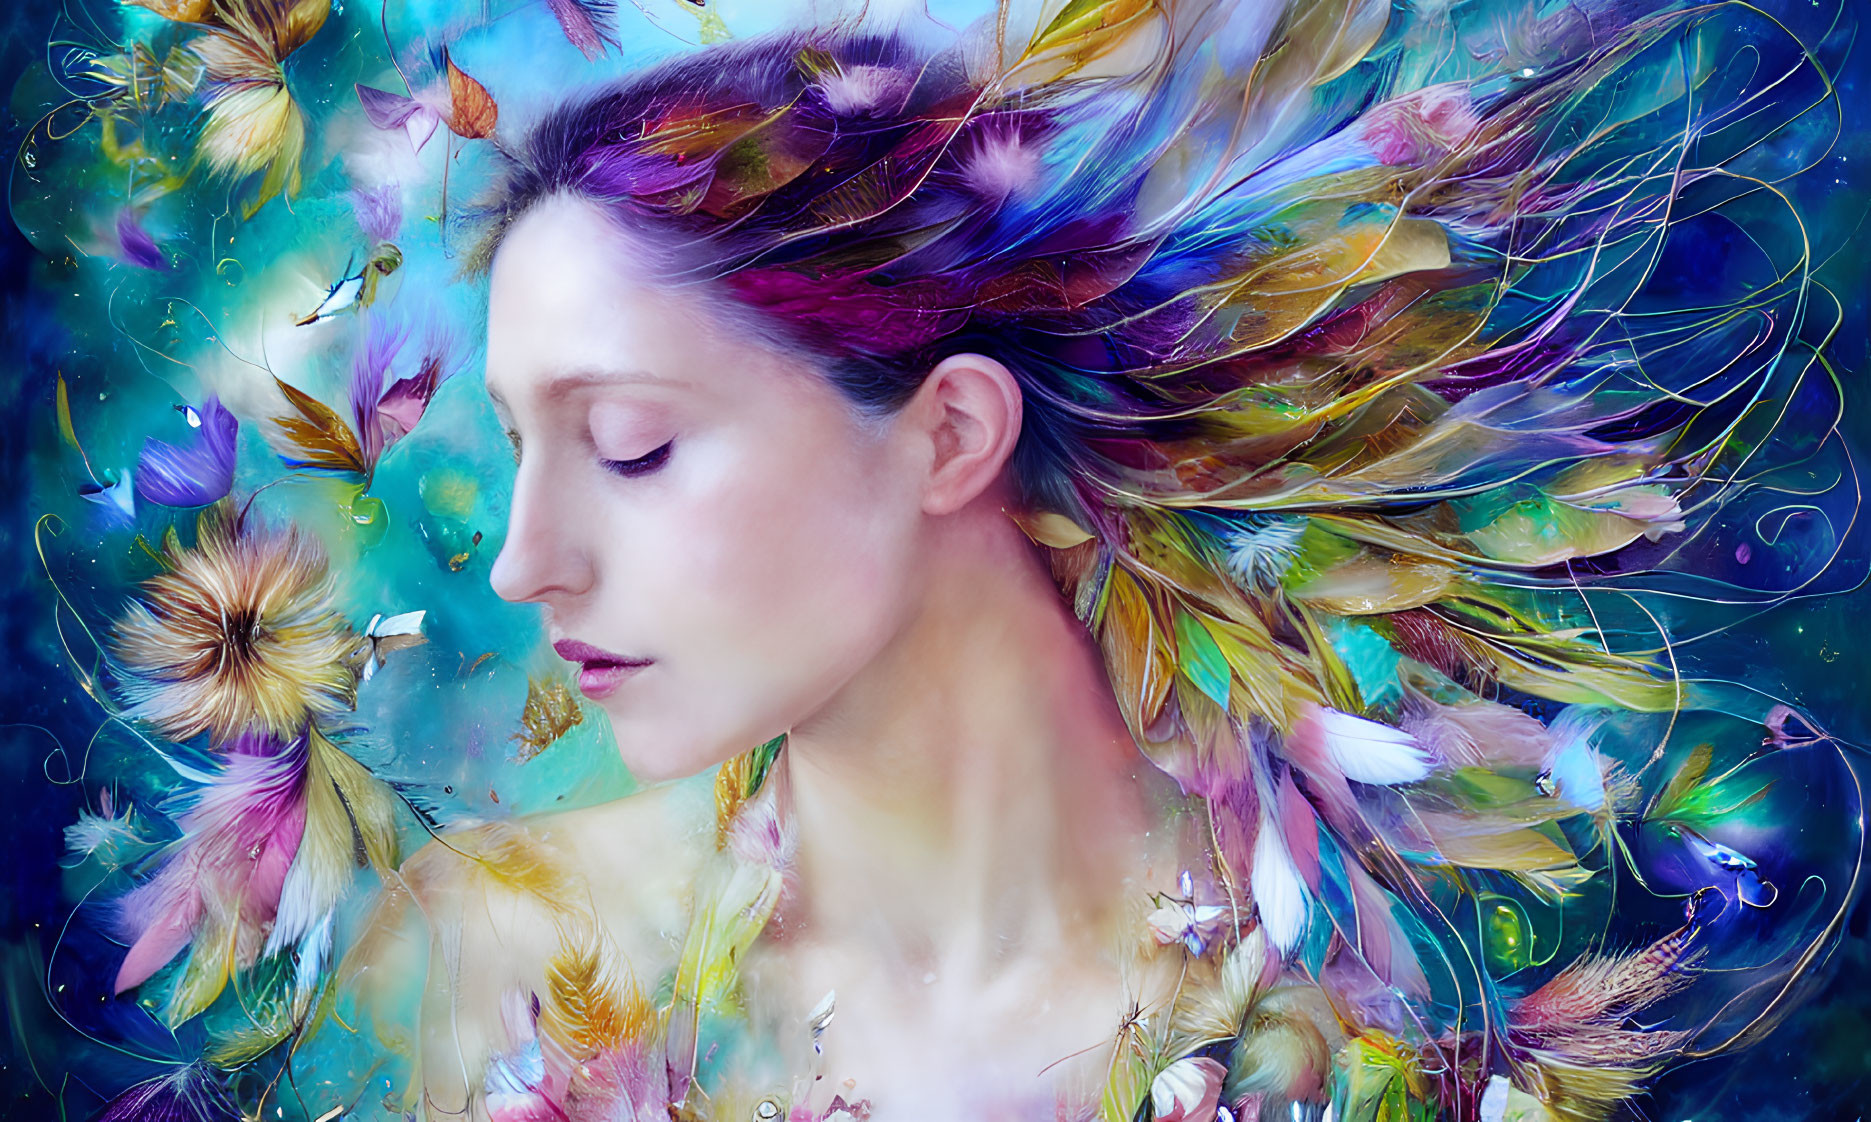 Colorful Feathers and Butterflies in Woman's Hair on Vibrant Blue Background